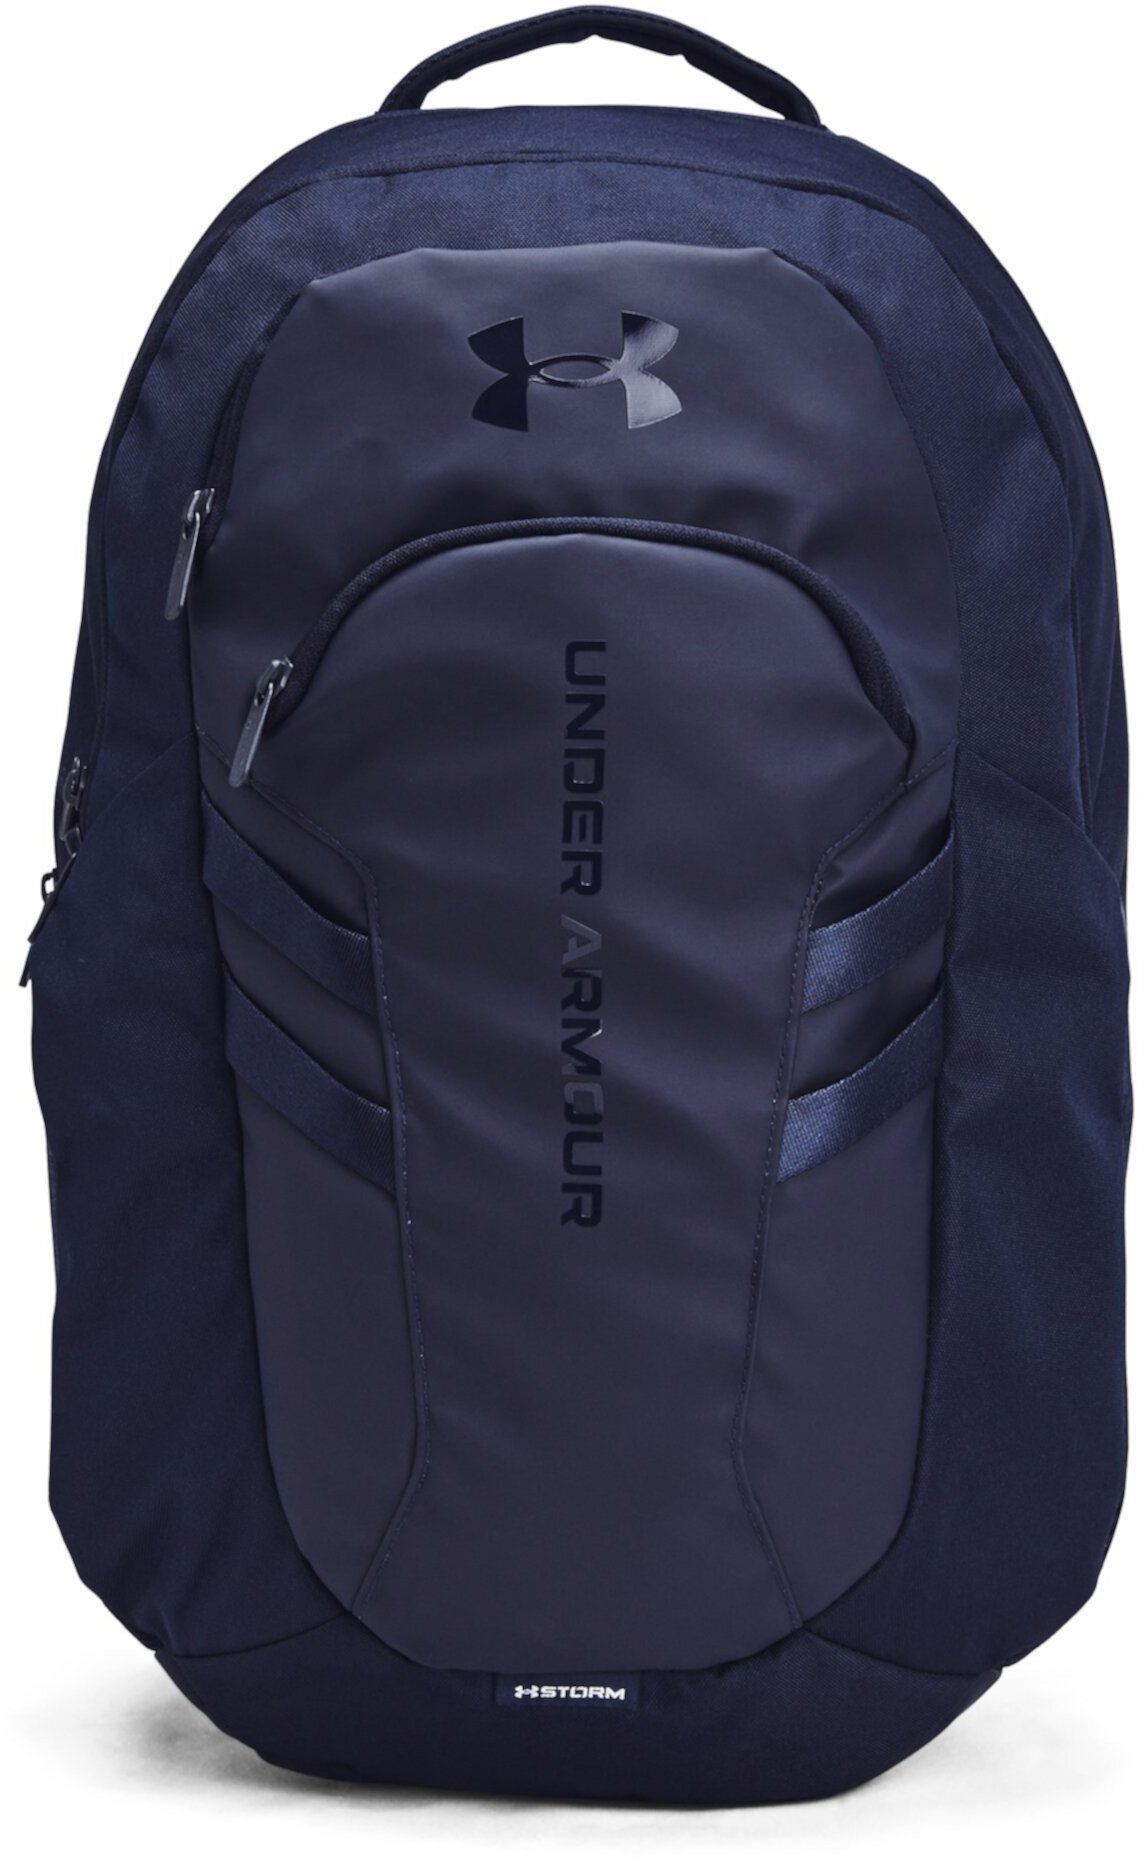 Hustle 6.0 Pro Backpack Under Armour